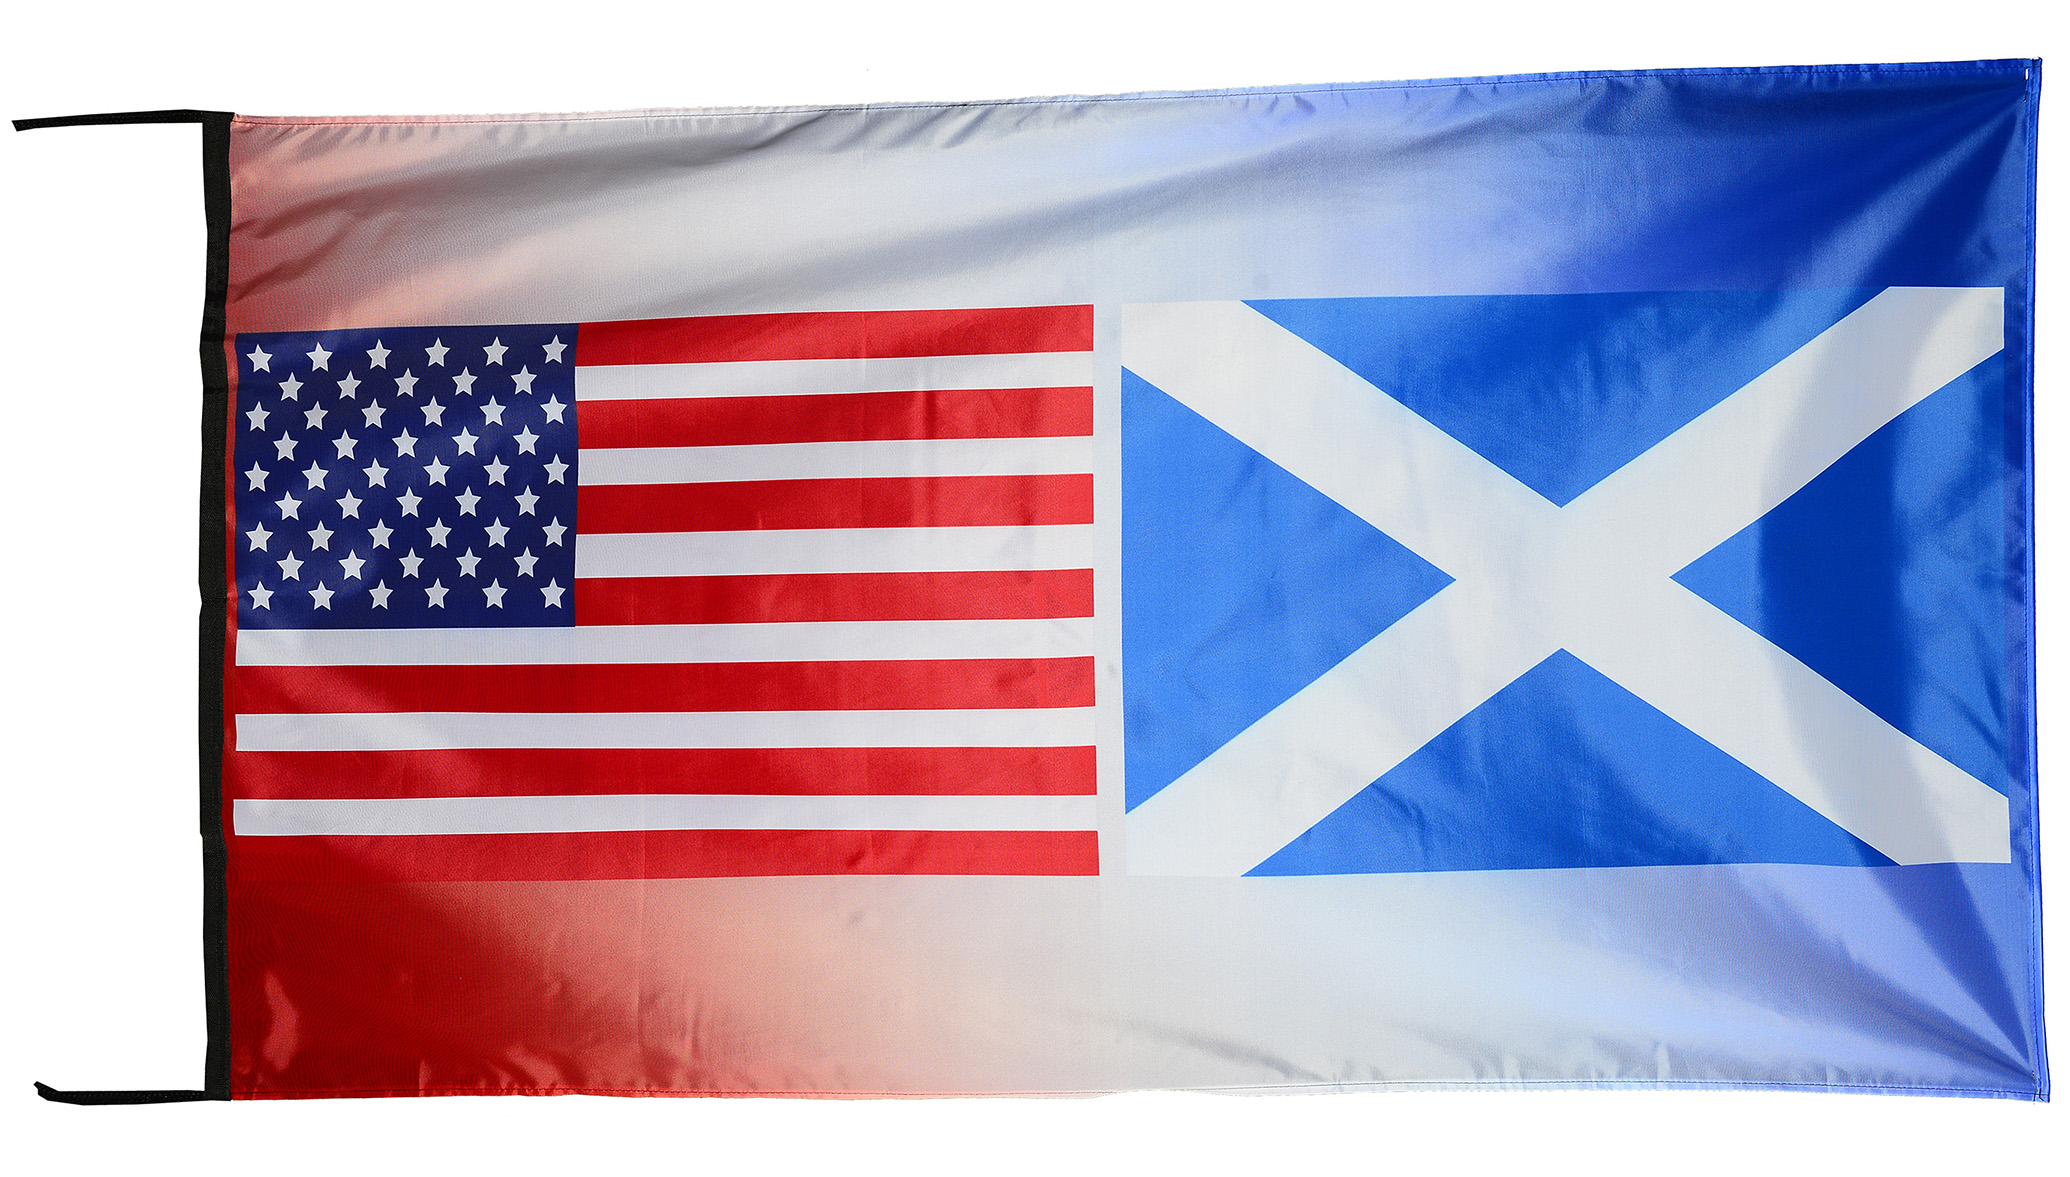 Flag  054 USA / US Country / United States Of America and Scotland / American / Scottish / Patriotic / United Kingdom / Pride Hybrid Weather-Resistant Polyester Outdoor Flag Landscape Banner / Vivid Colors / 3 X 5 FT (150 x 90cm) International Flags for Sale